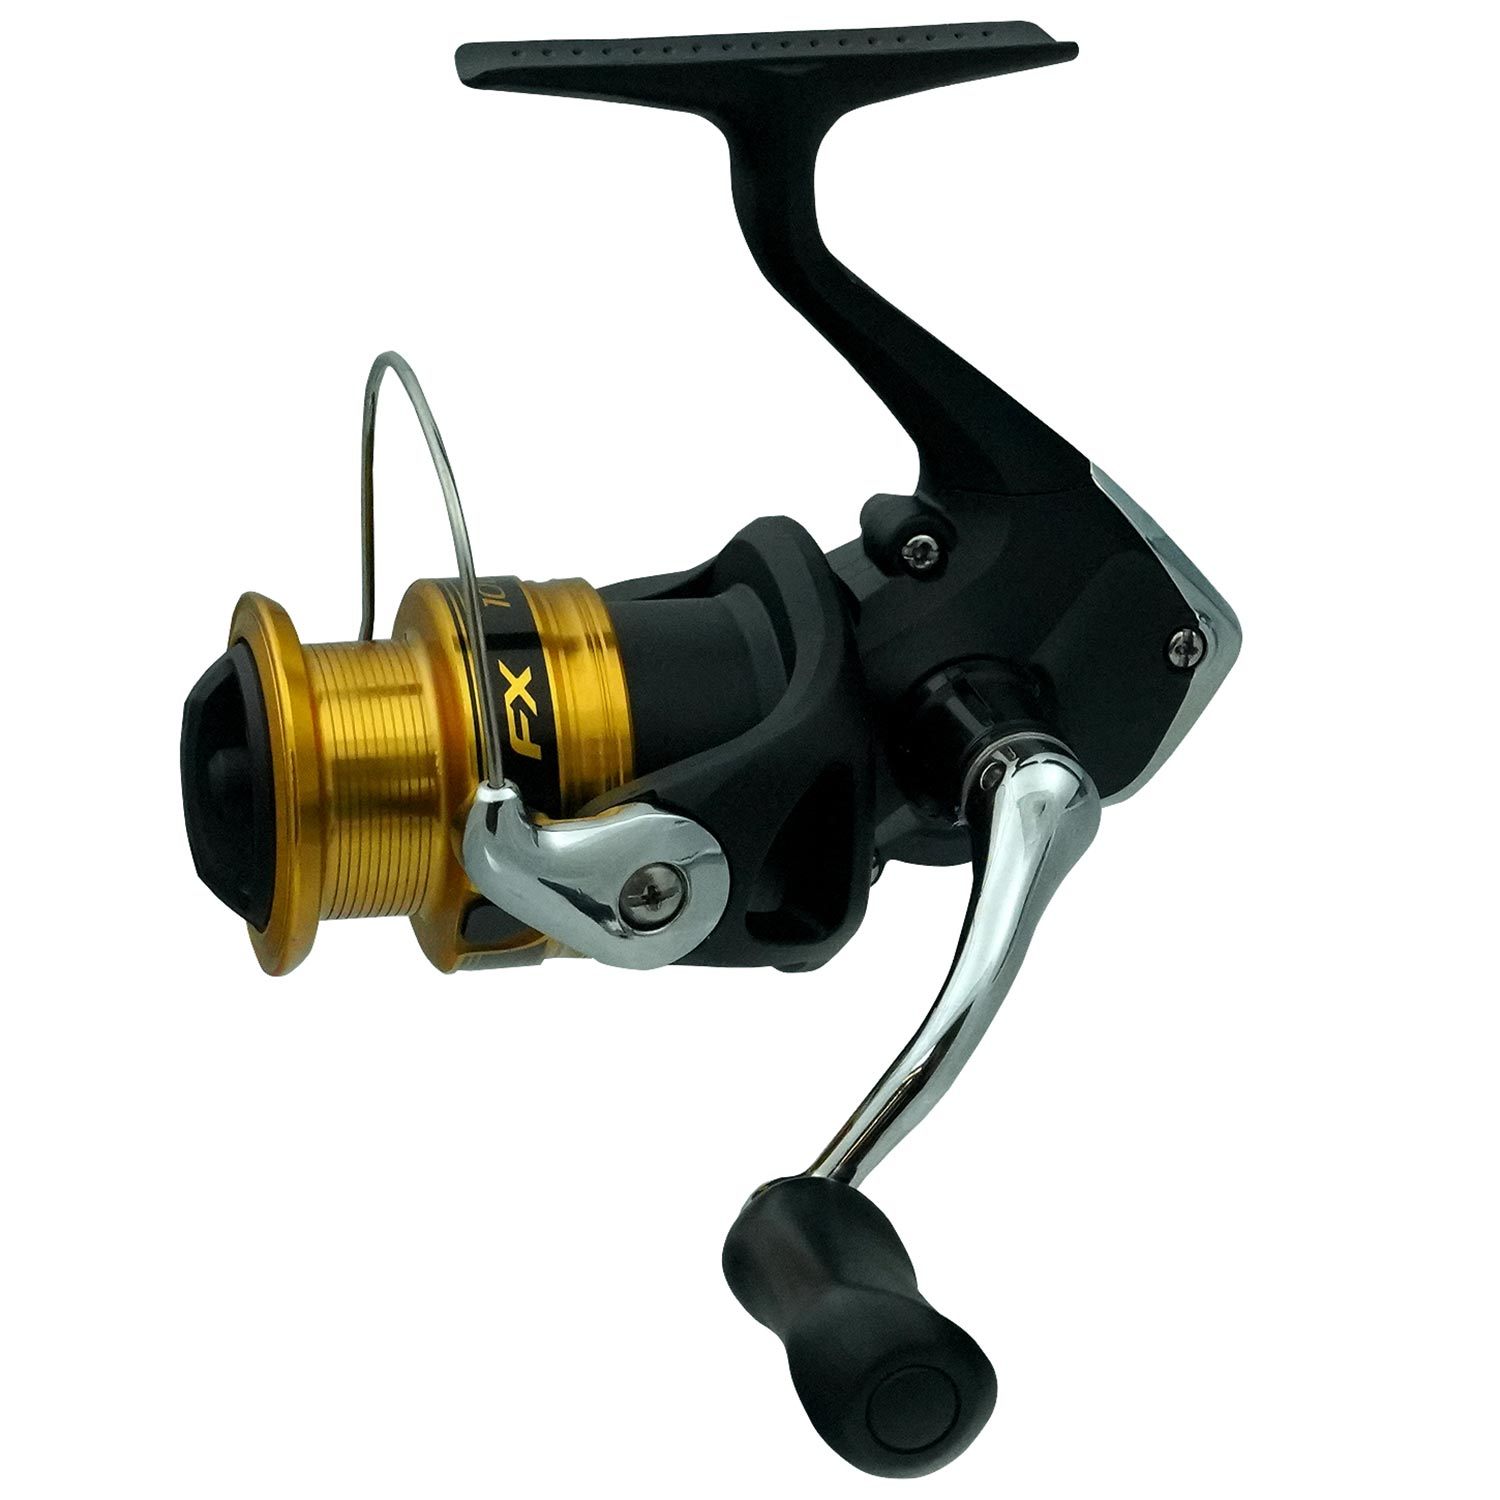 FX FC, FRONT DRAG, SPINNING, REELS, PRODUCT